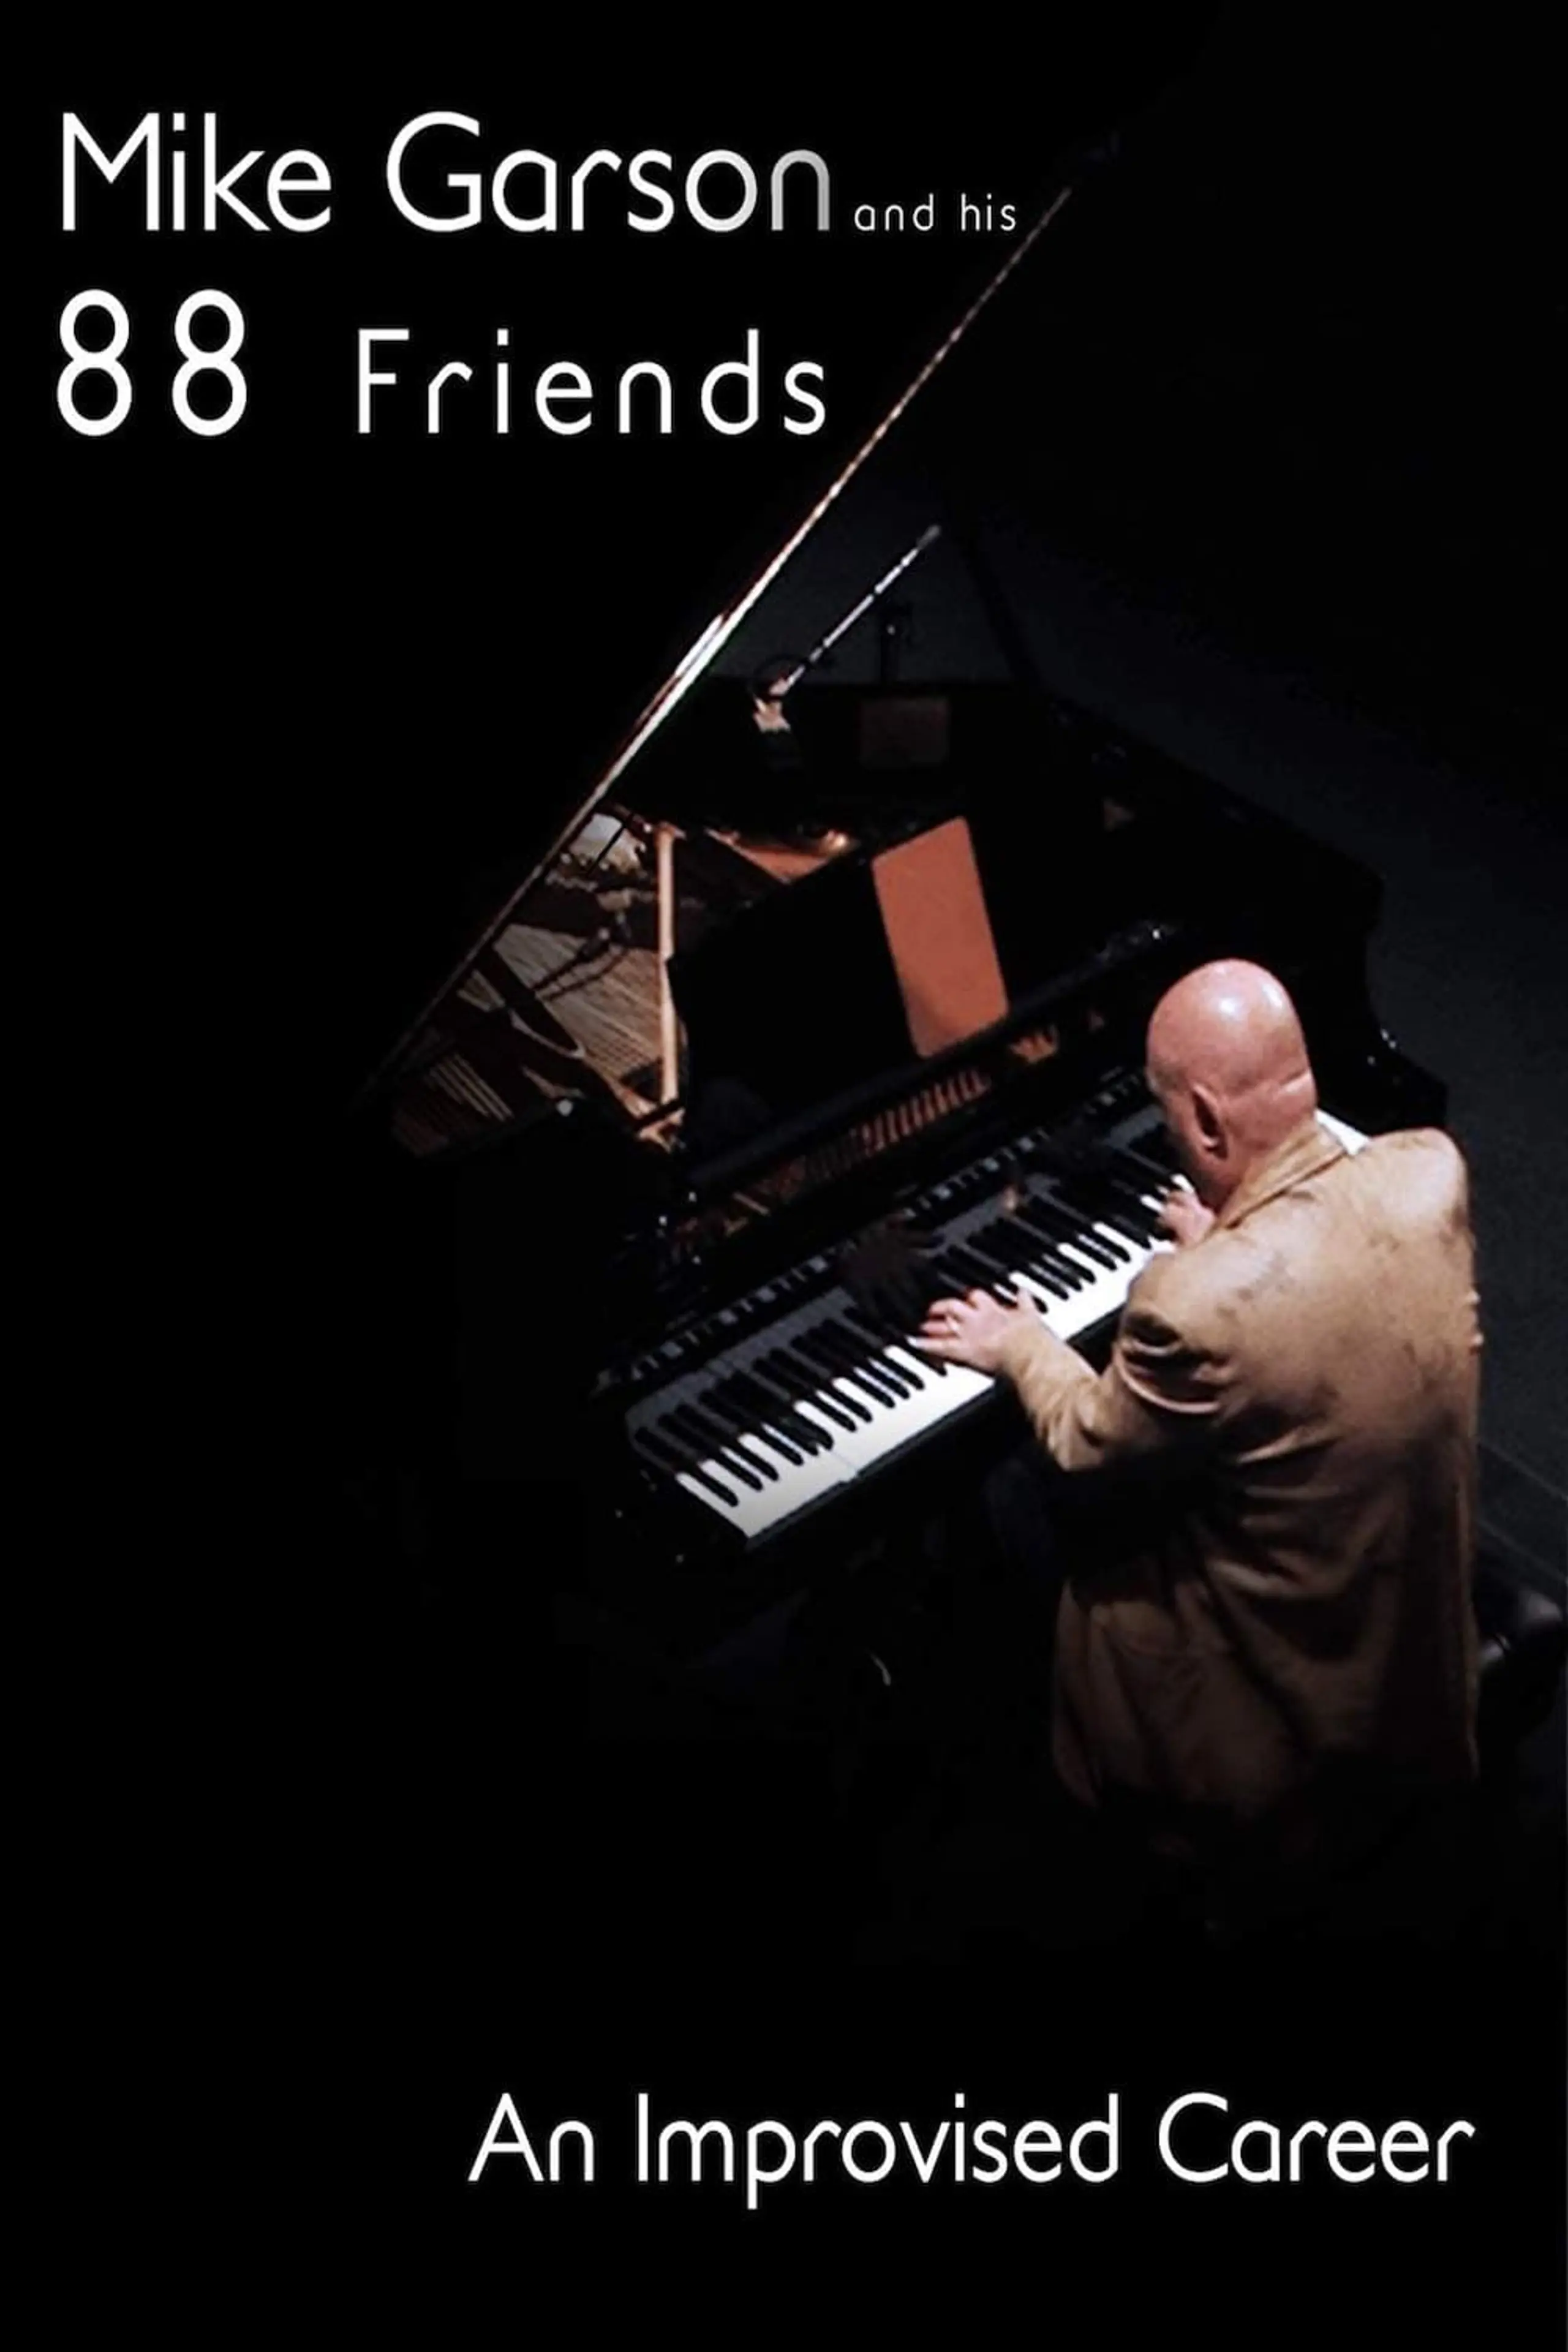 Mike Garson and His 88 Friends